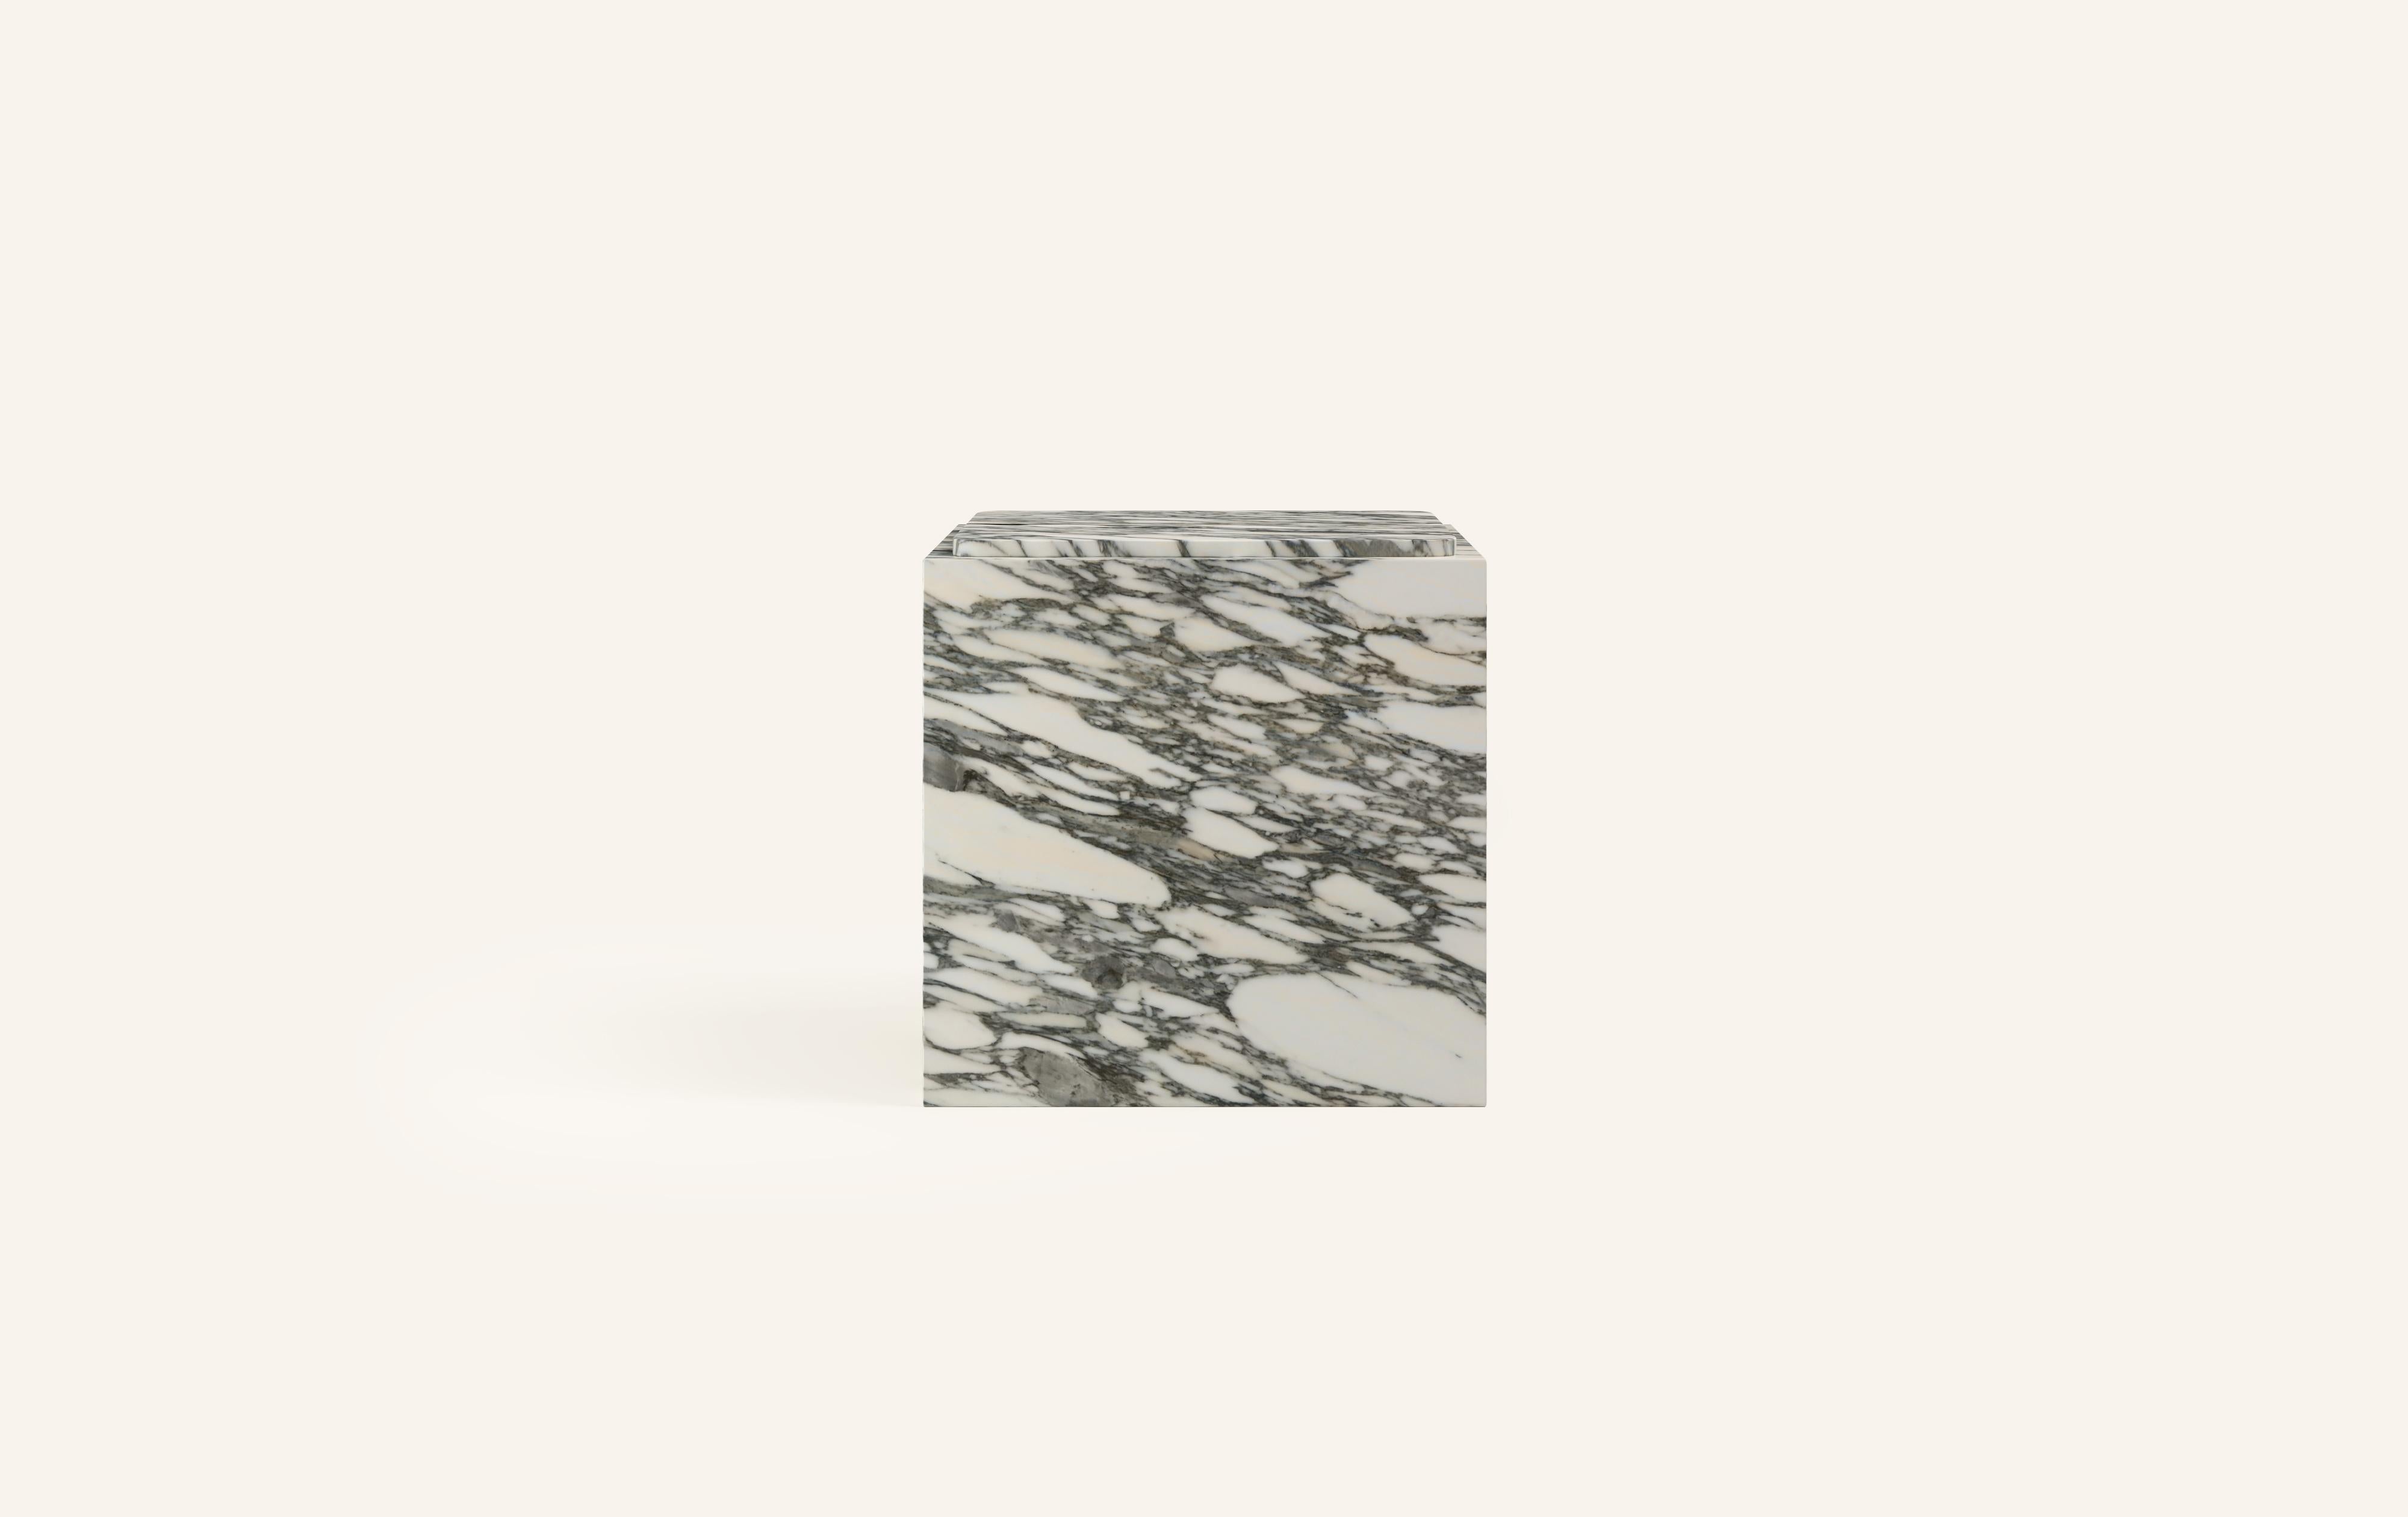 MONOLITHIC FORMS SOFTENED BY GENTLE EDGES. WITH ITS BOLD MARBLE PATTERNS CUBO IS AS VERSATILE AS IT IS STRIKING.

DIMENSIONS:
22”L x 22”W x 22”H:
- 3/4